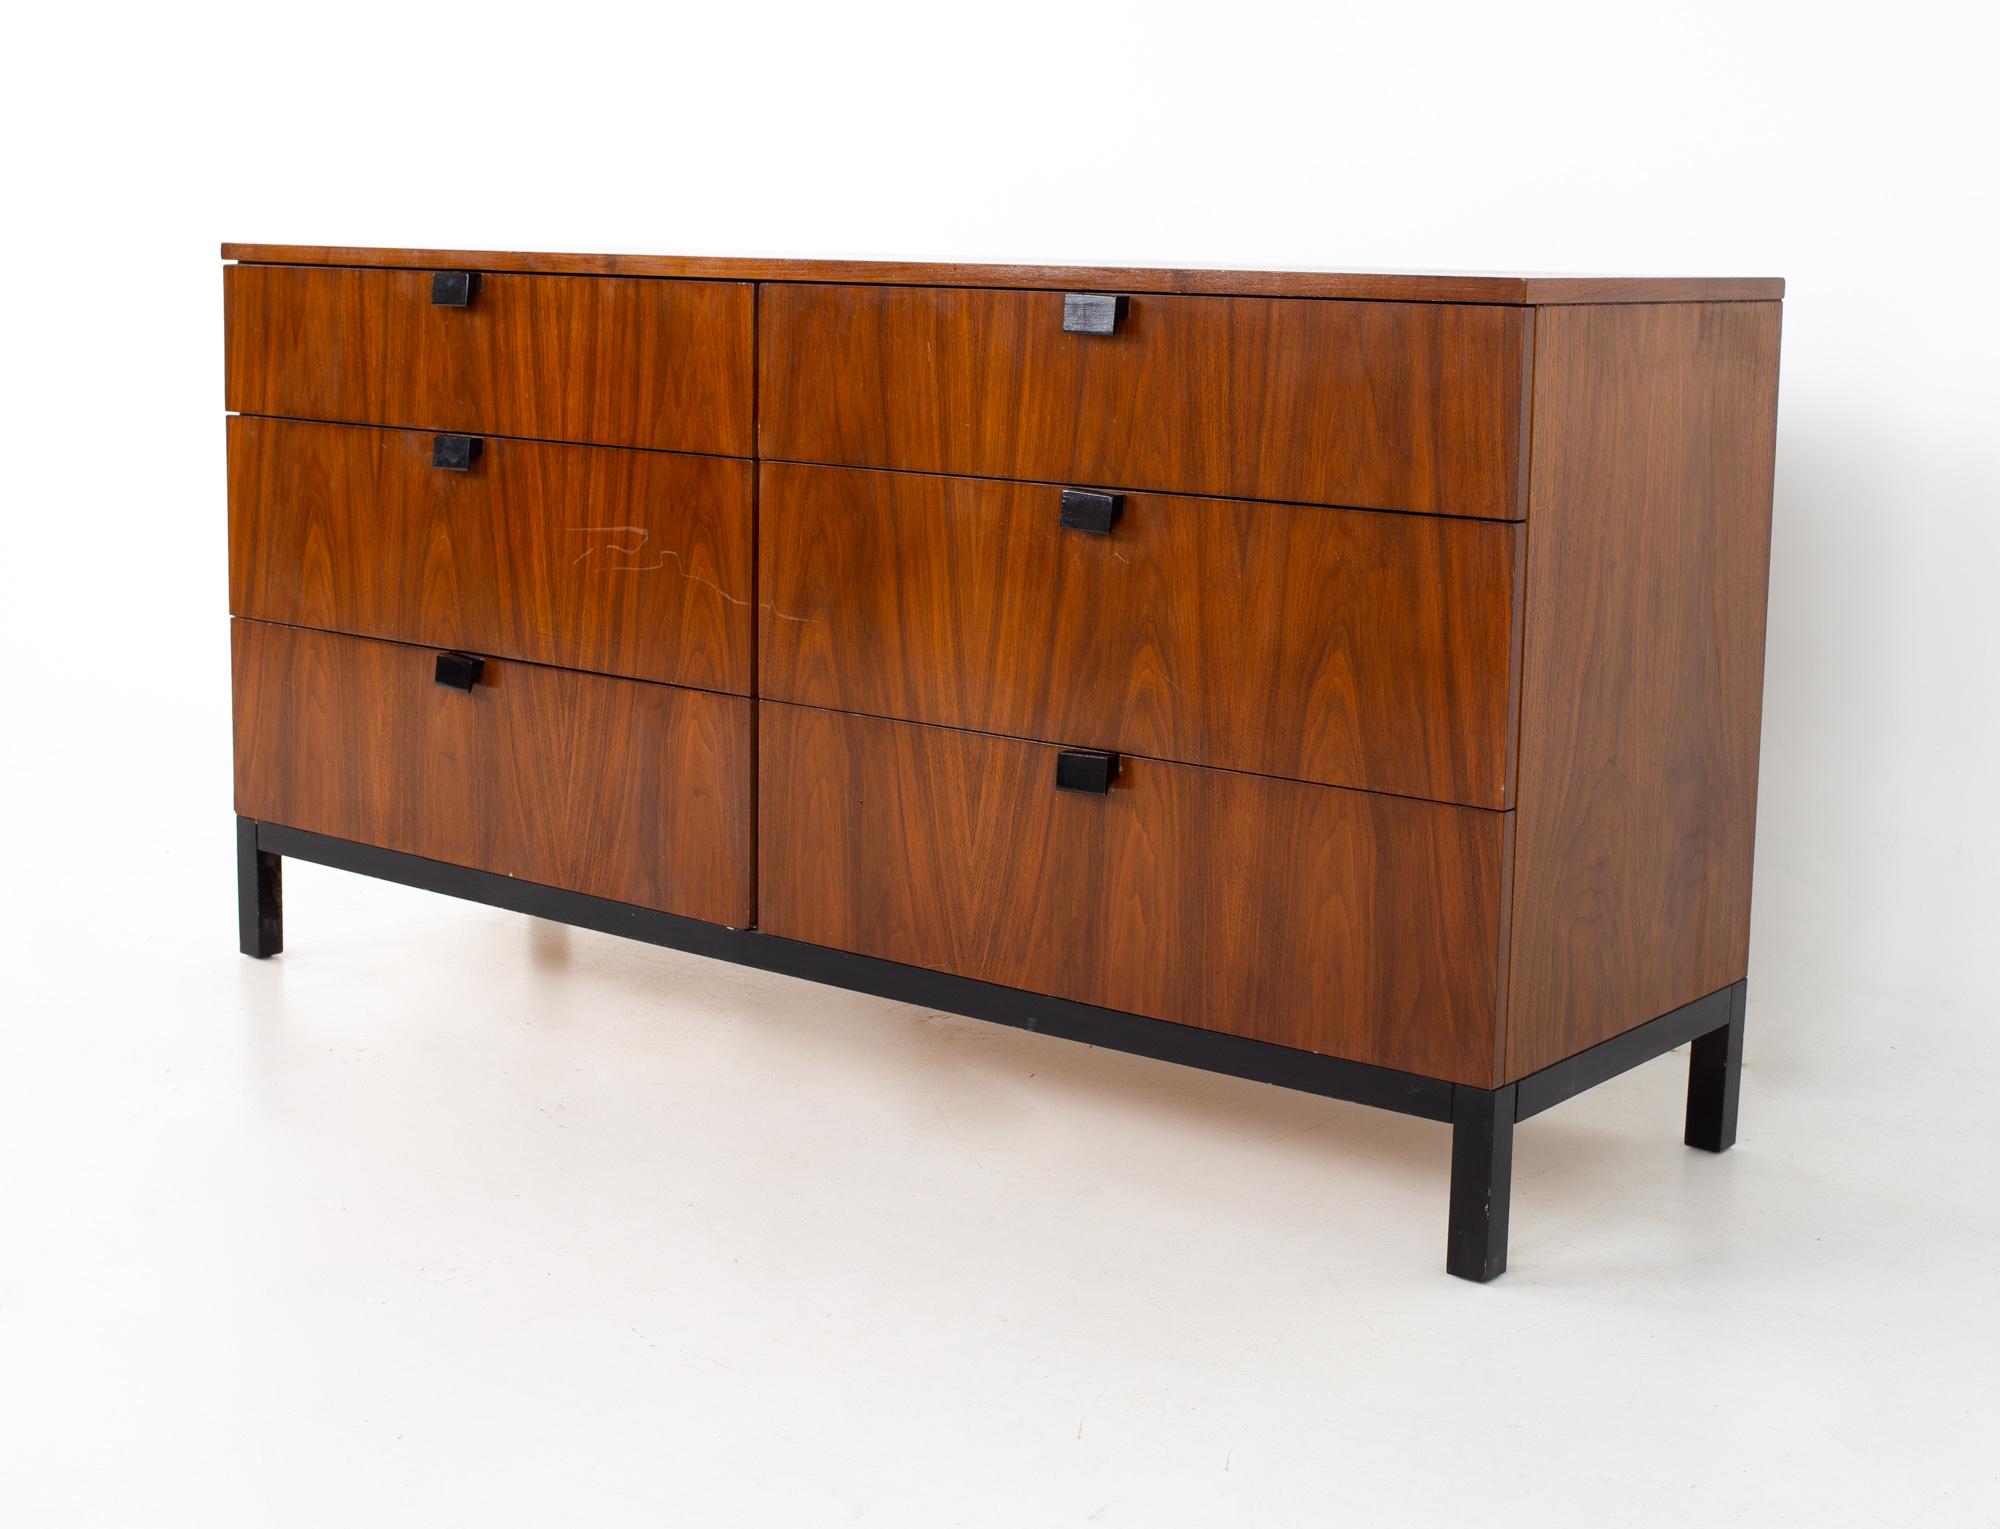 Milo Baughman for Directional mid century 6 drawer dresser
Dresser measures: 60 wide x 18.25 deep x 30 inches high

All pieces of furniture can be had in what we call restored vintage condition. That means the piece is restored upon purchase so